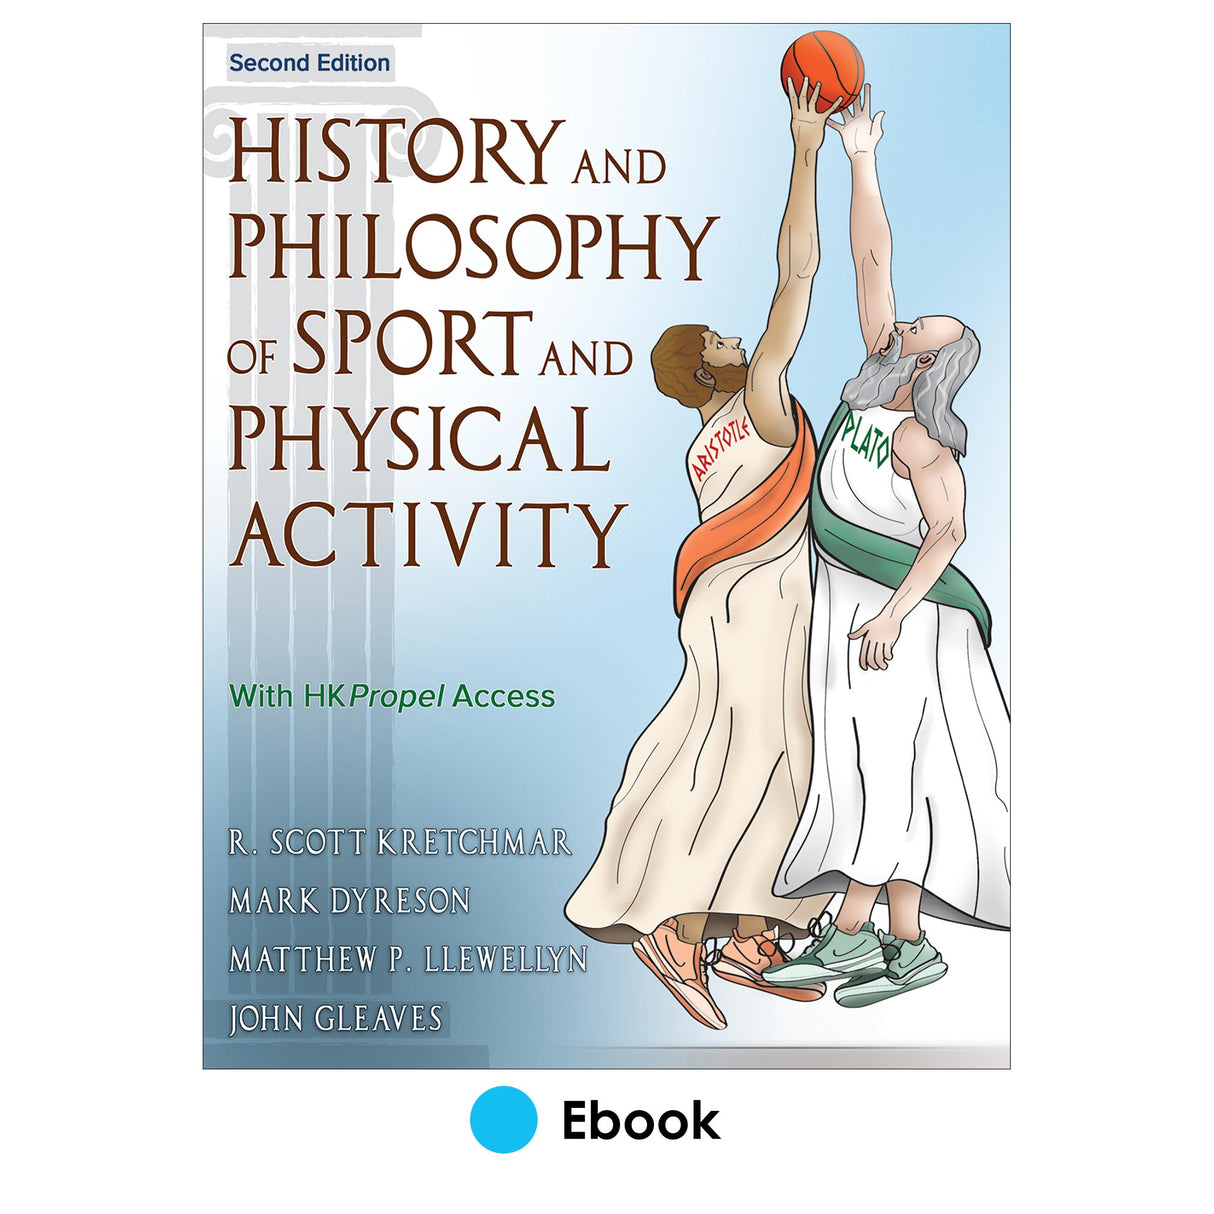 History and Philosophy of Sport and Physical Activity 2nd Edition Ebook With HKPropel Access